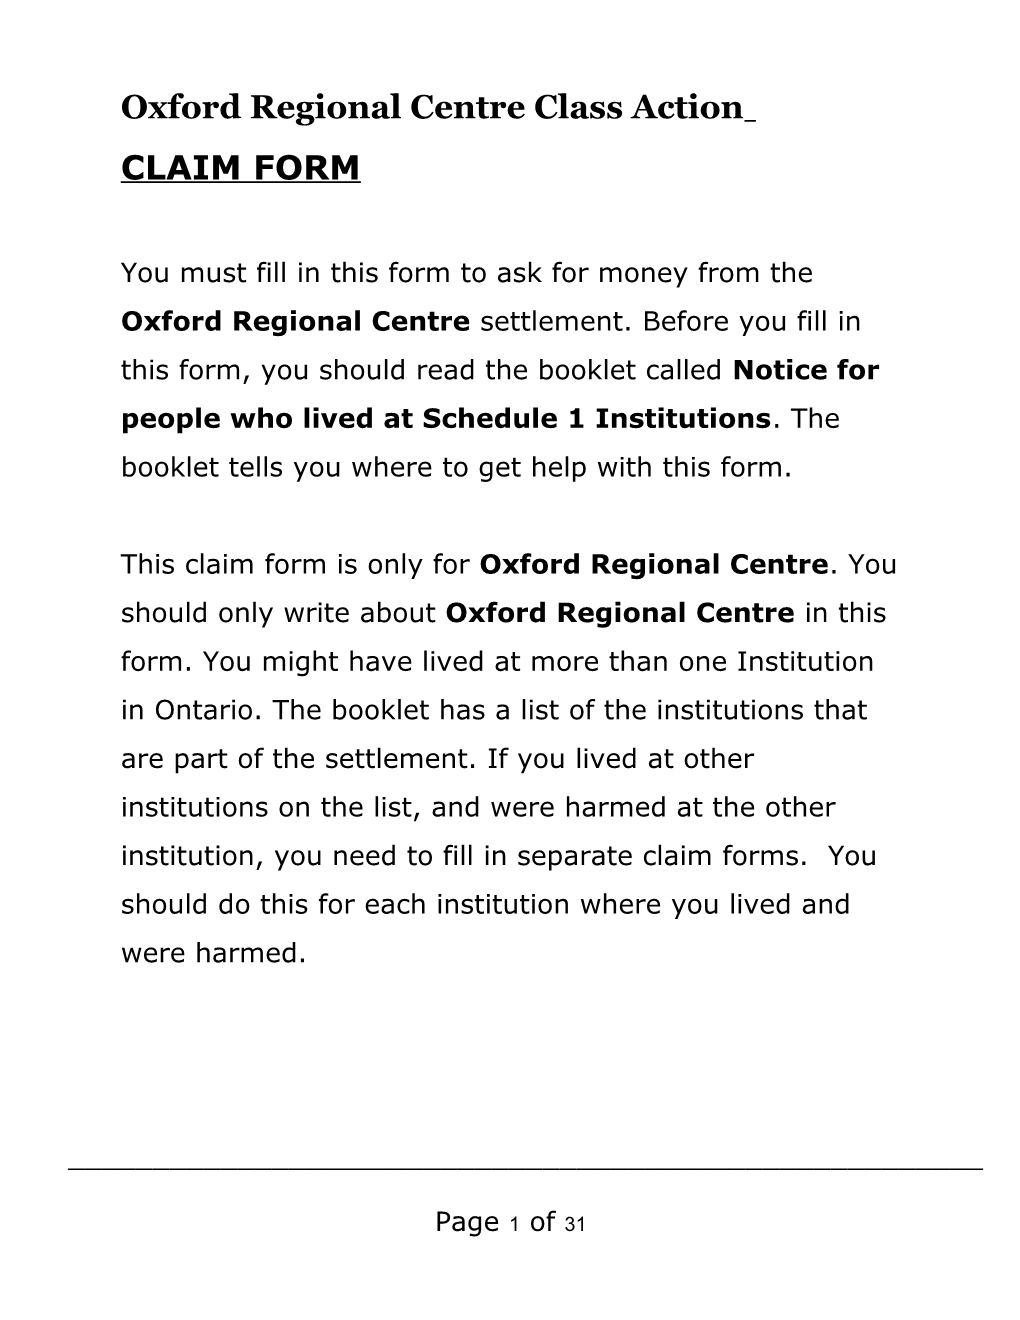 CLAIM FORM for The